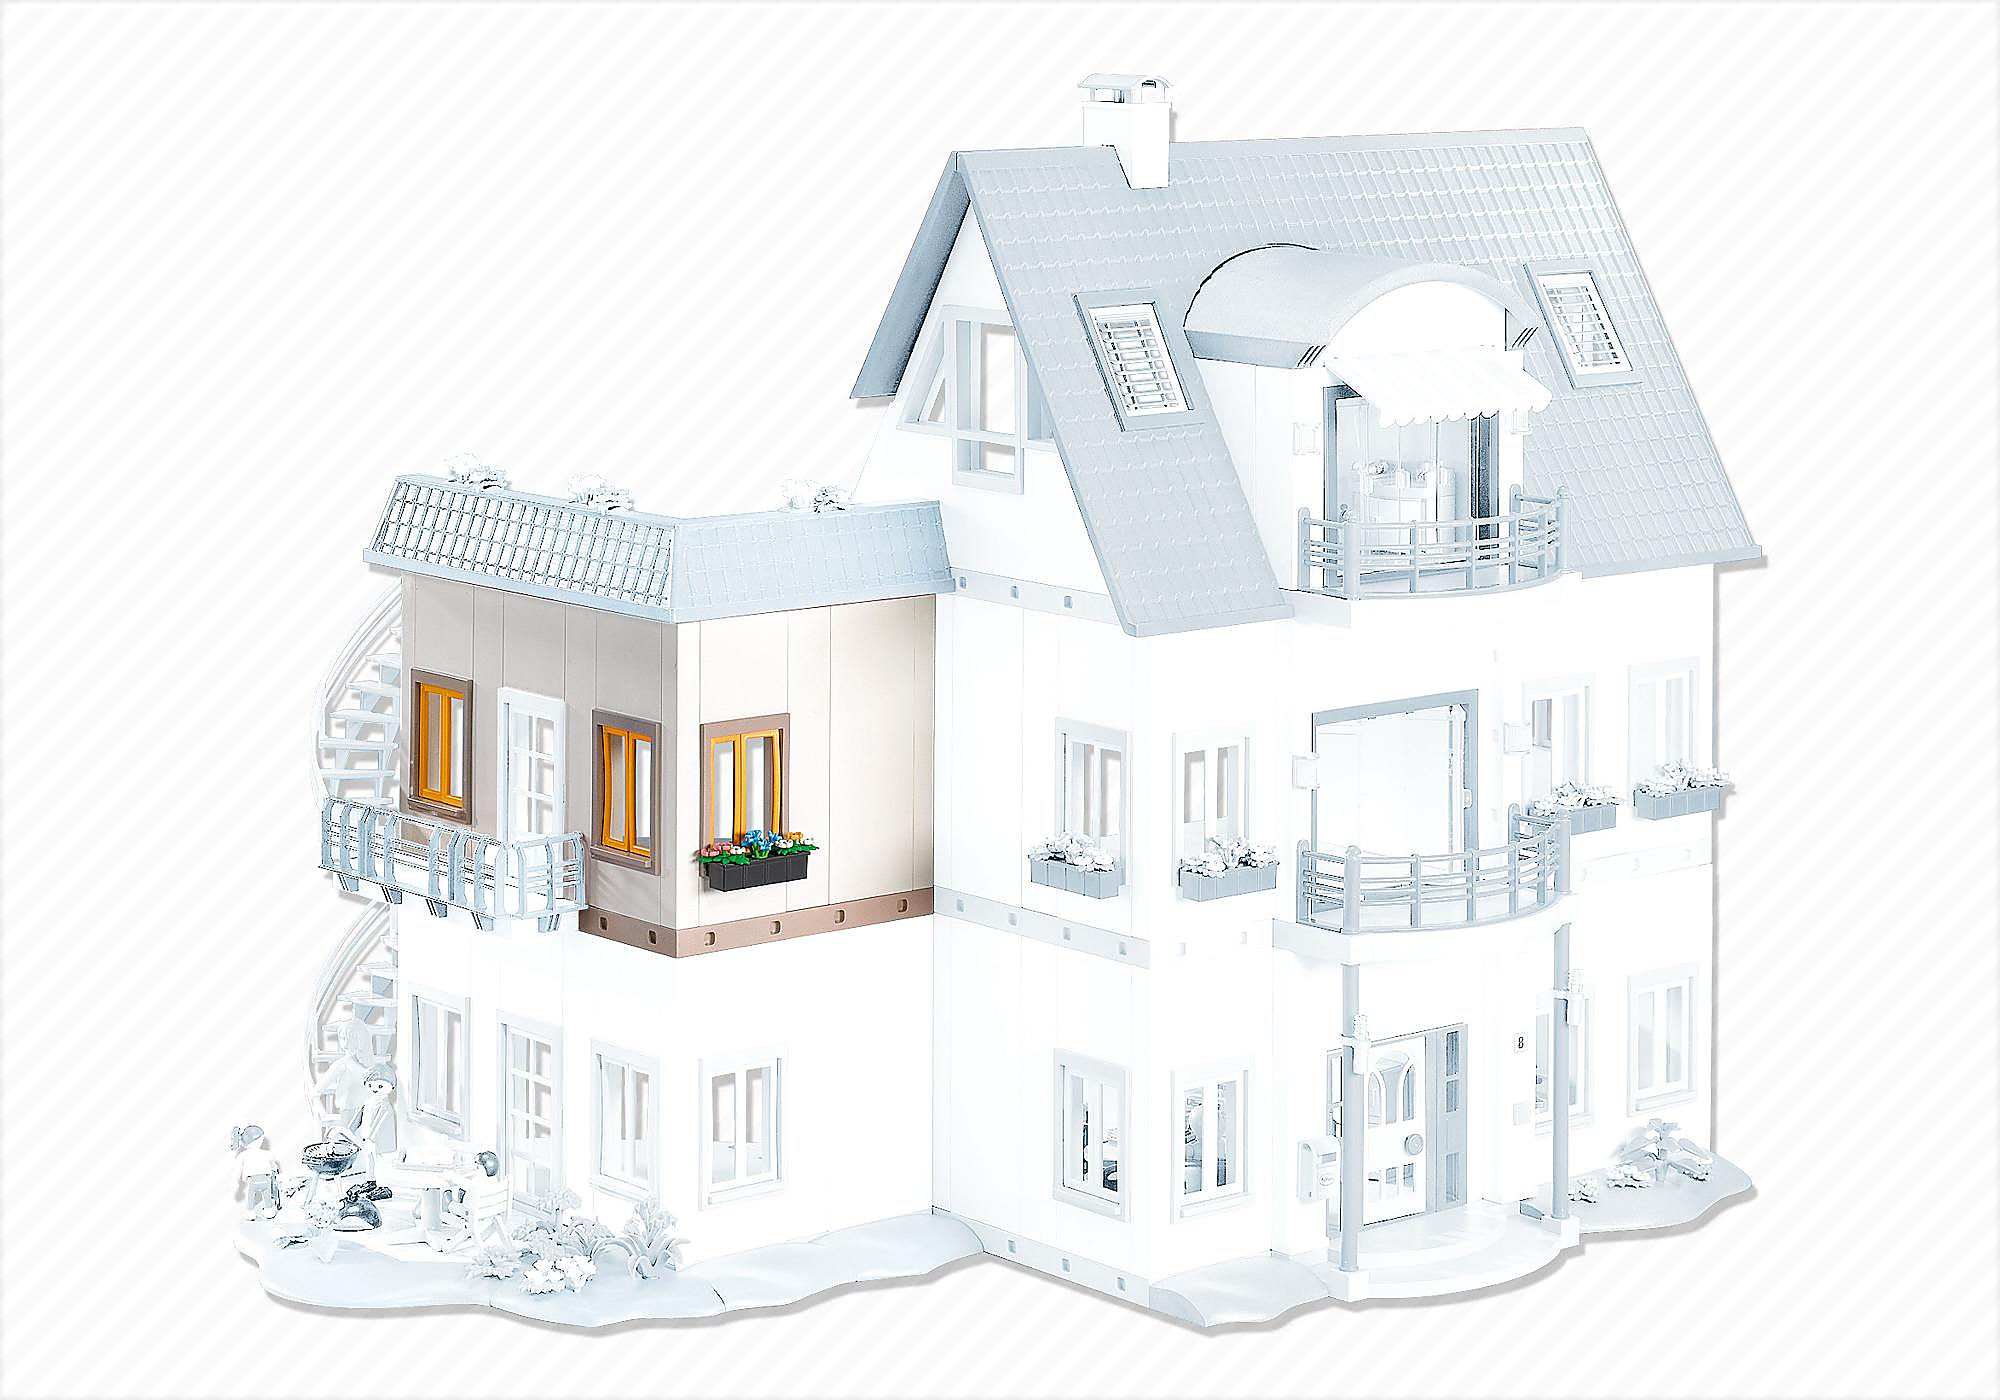 Playmobil Corner Extension For Suburban Home Add On Set 7388